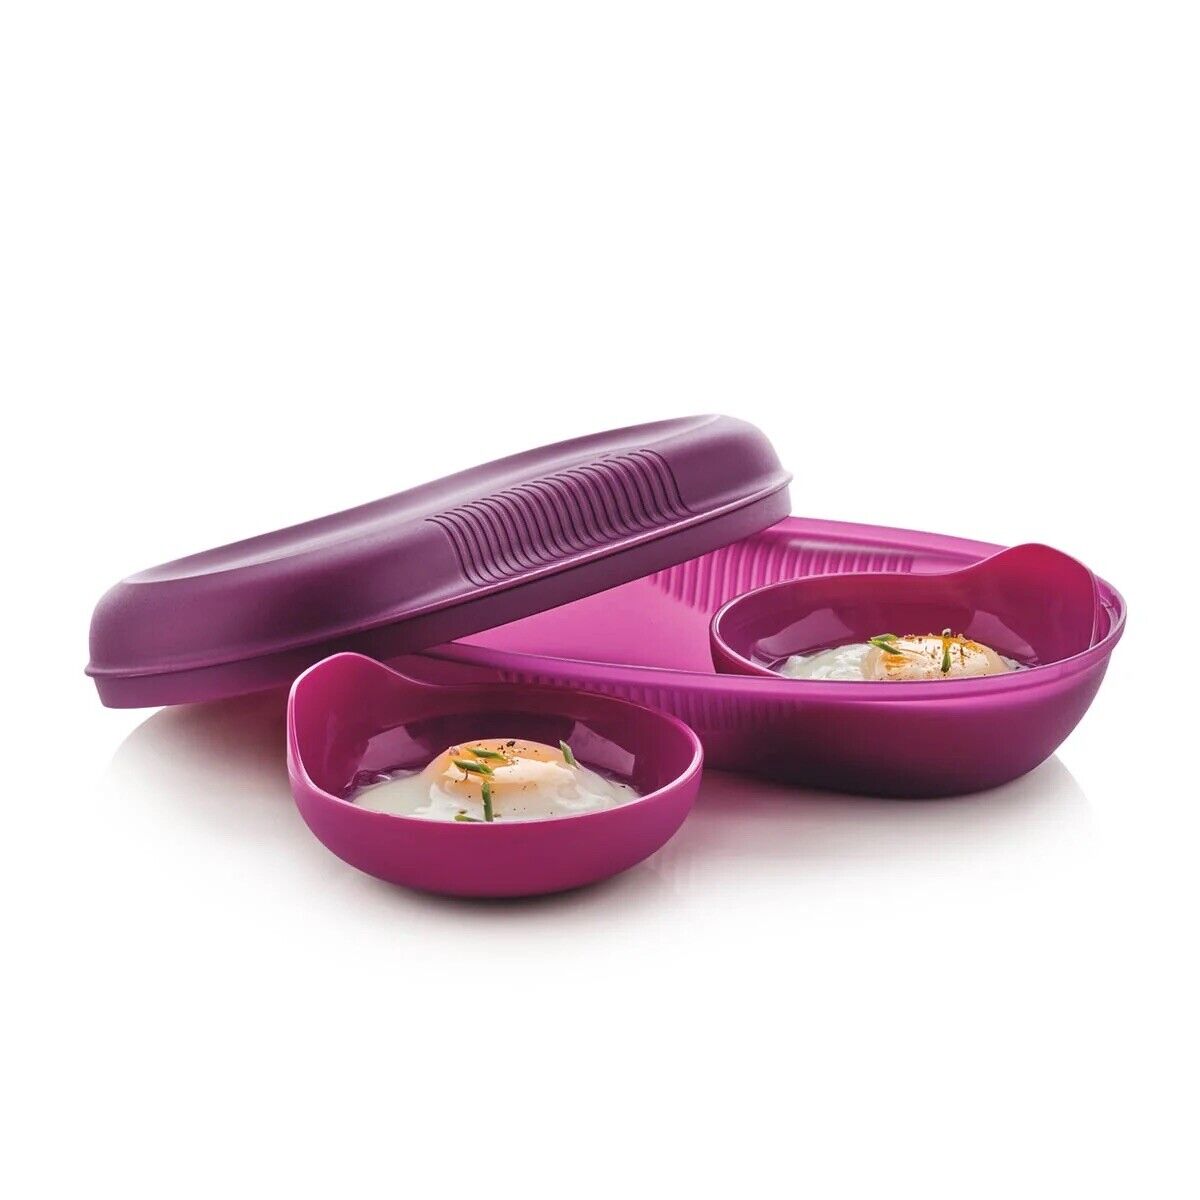 Tupperware Microwave Breakfast Maker with Egg Inserts and Manual Purple